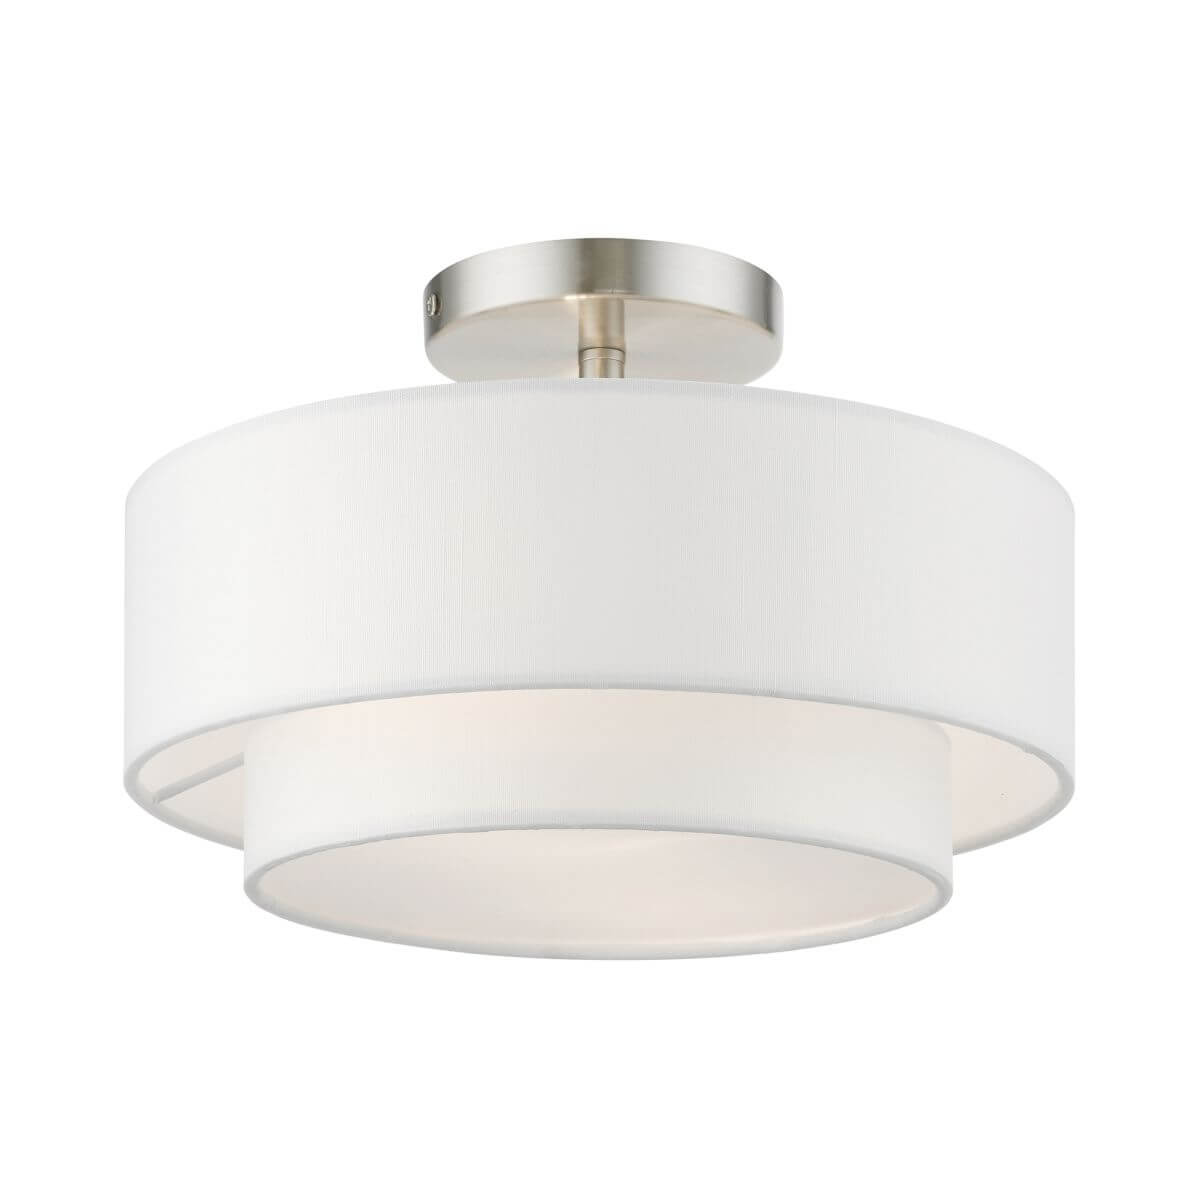 2 Light 12 inch Semi-Flush Mount in Brushed Nickel with Hand Crafted Off-white Hardback Fabric Shade - White Fabric Inside - 245317